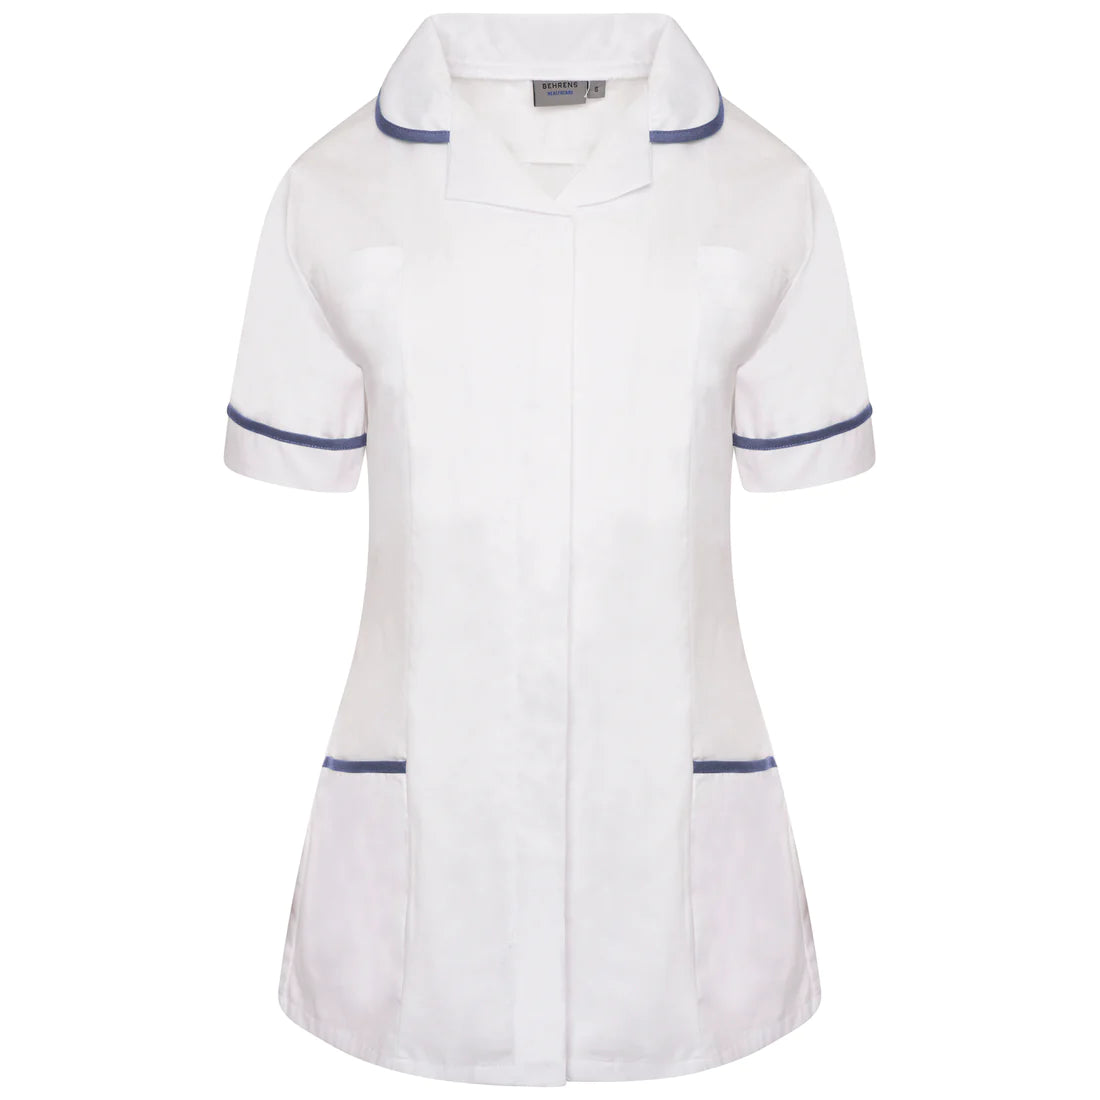 White/Sky Contrast Ladies Tunic with Round Collar - NCLTPS